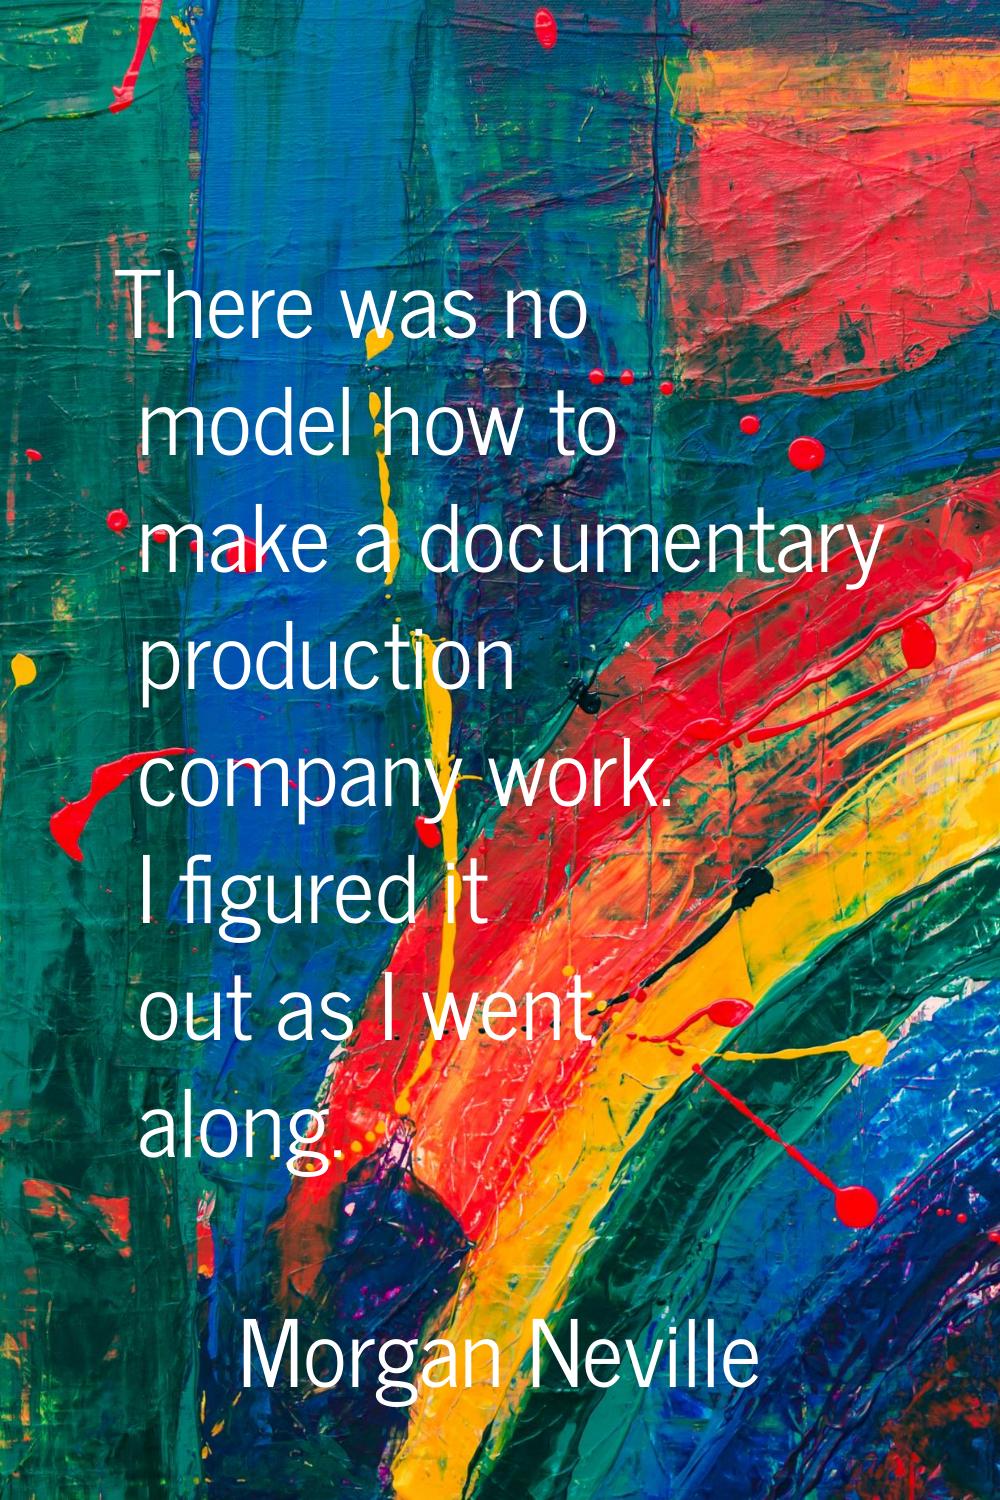 There was no model how to make a documentary production company work. I figured it out as I went al